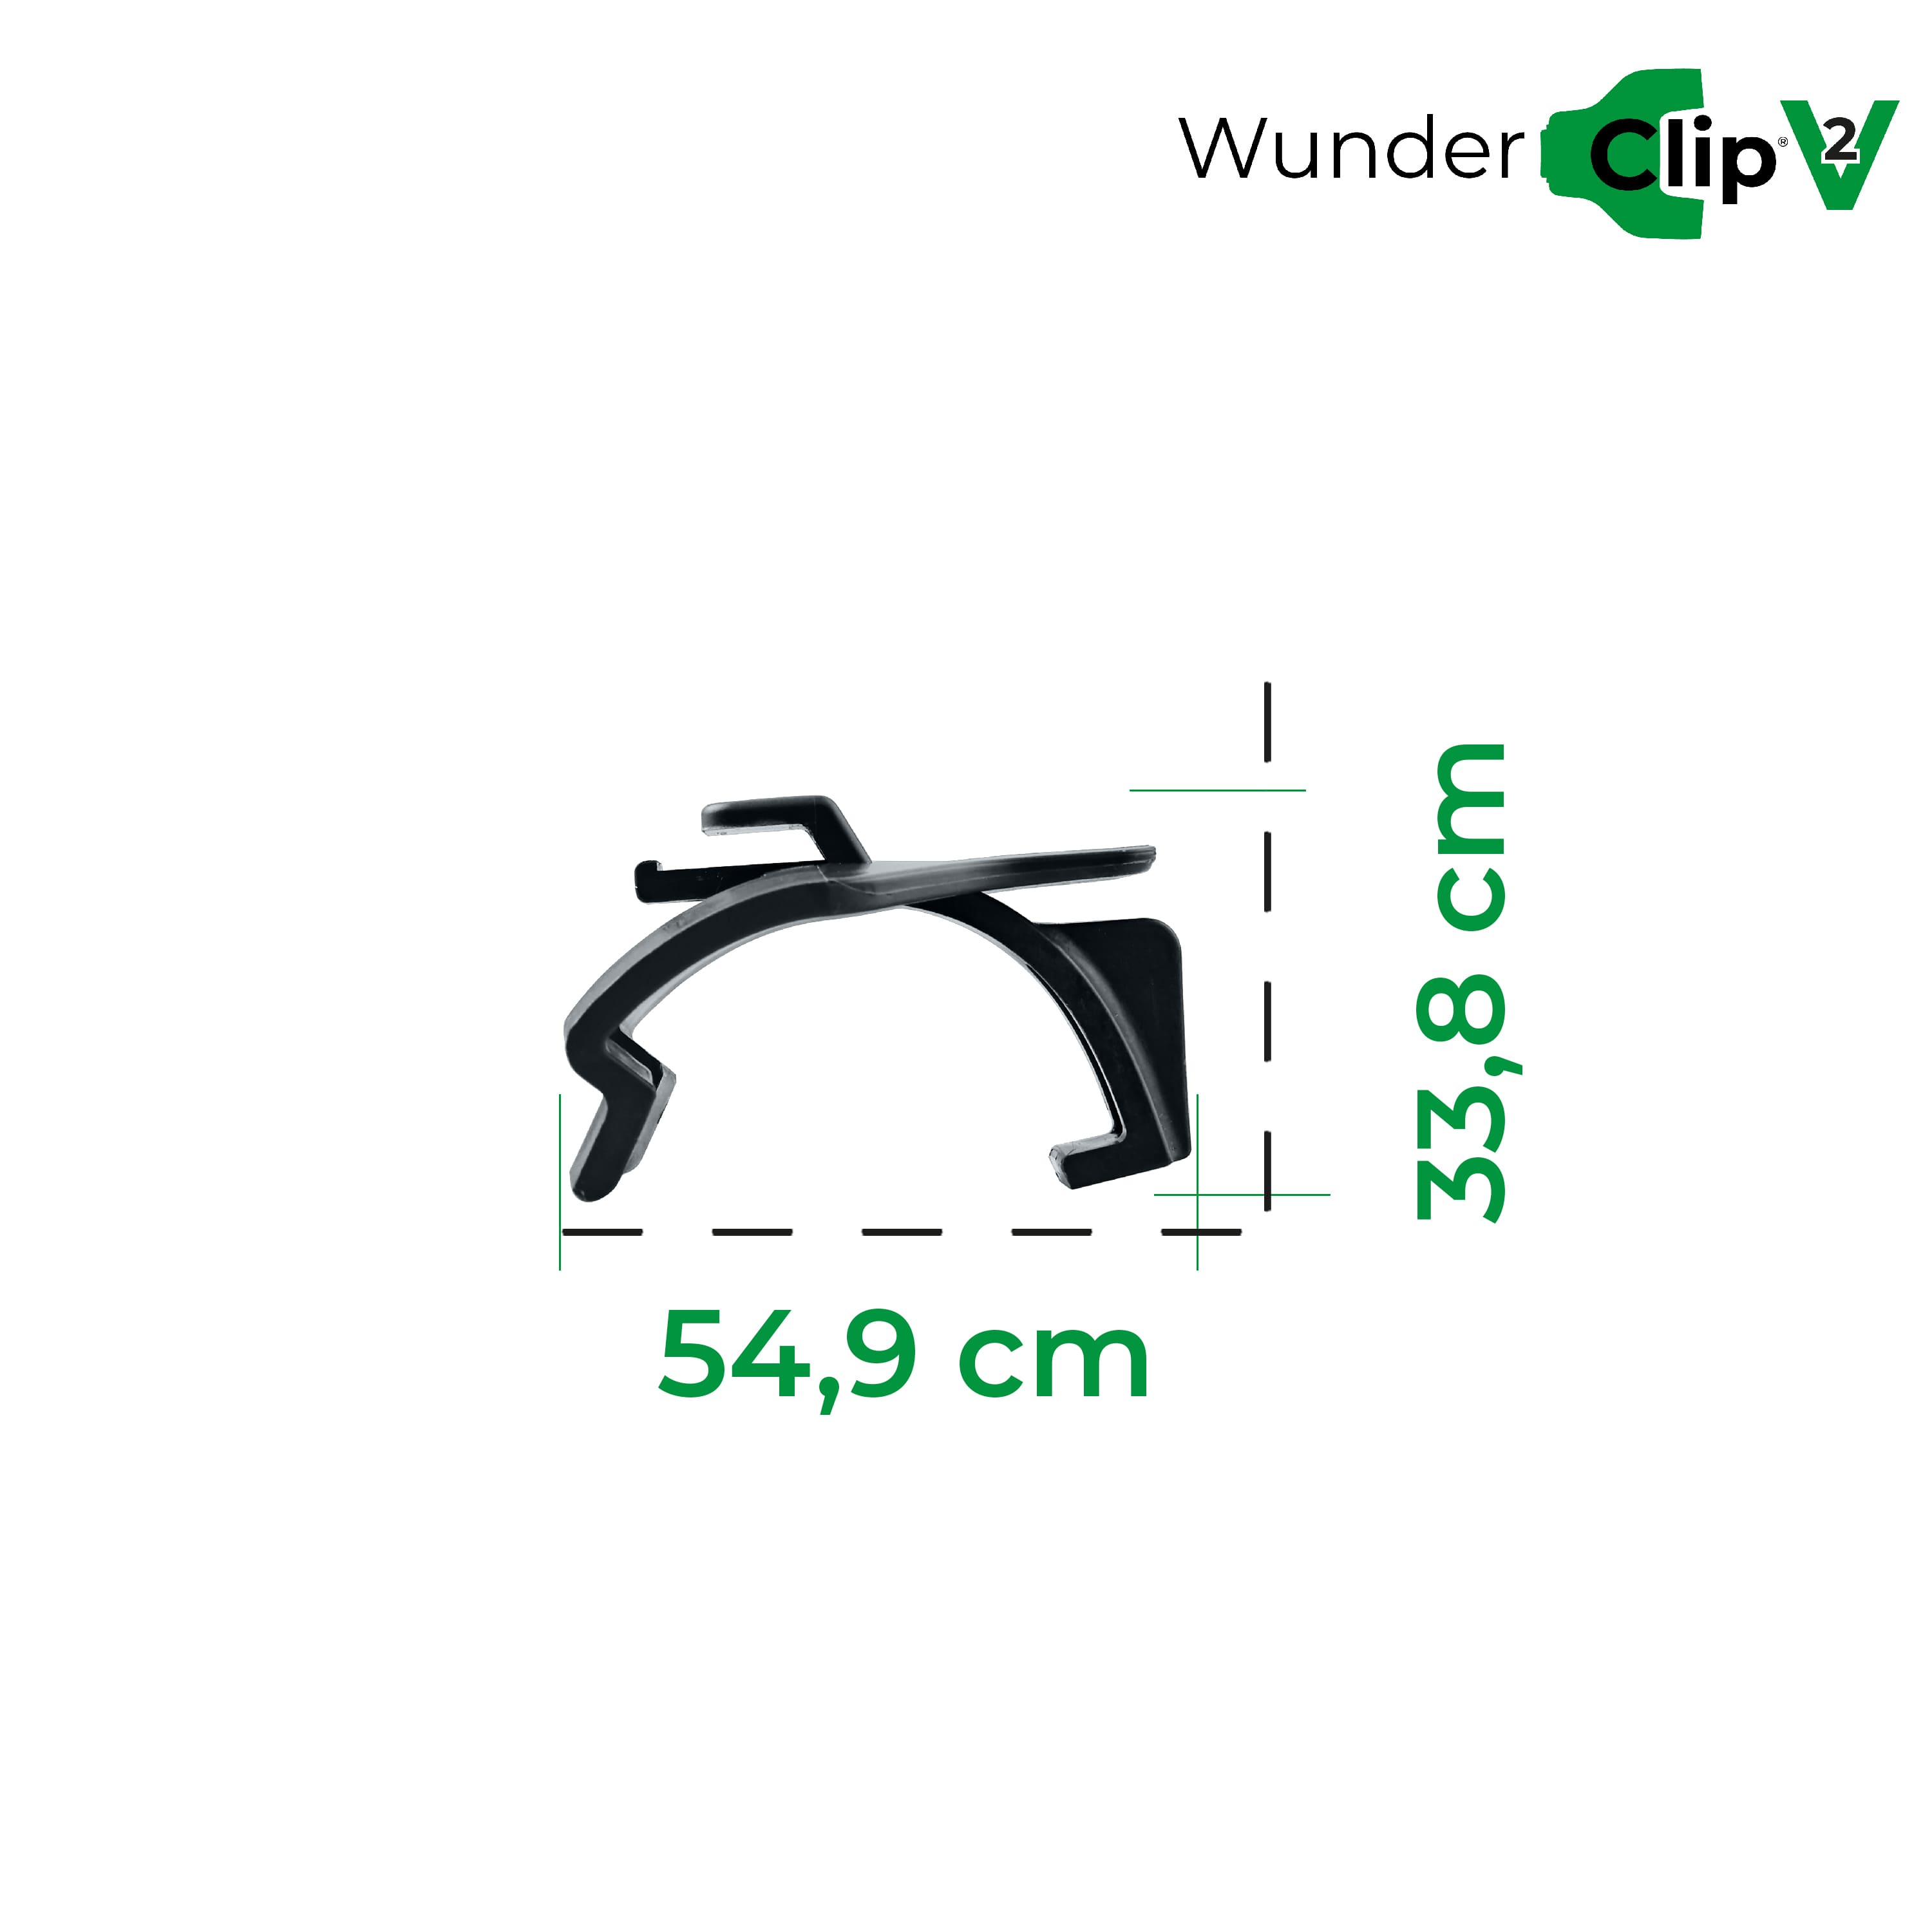 WunderClip® | Lid holder for the Thermomix TM6, TM5